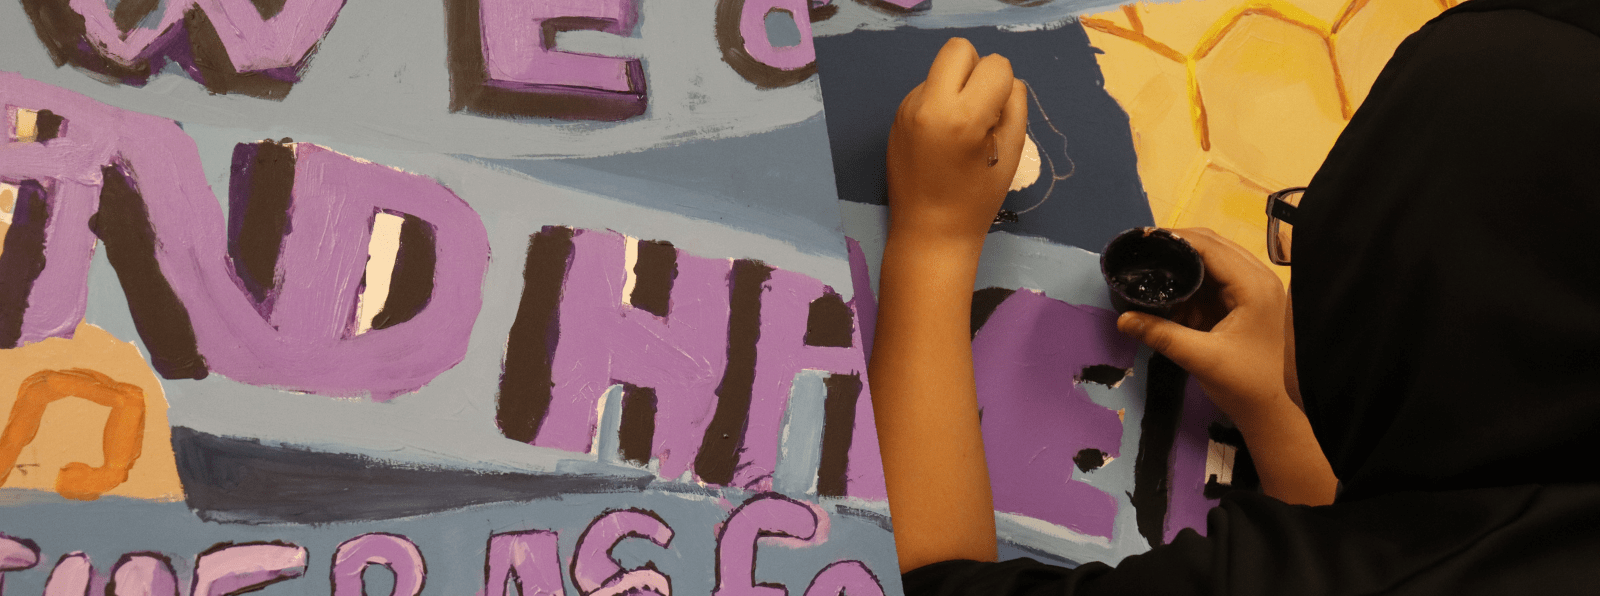 A person is painting a mural that includes text.